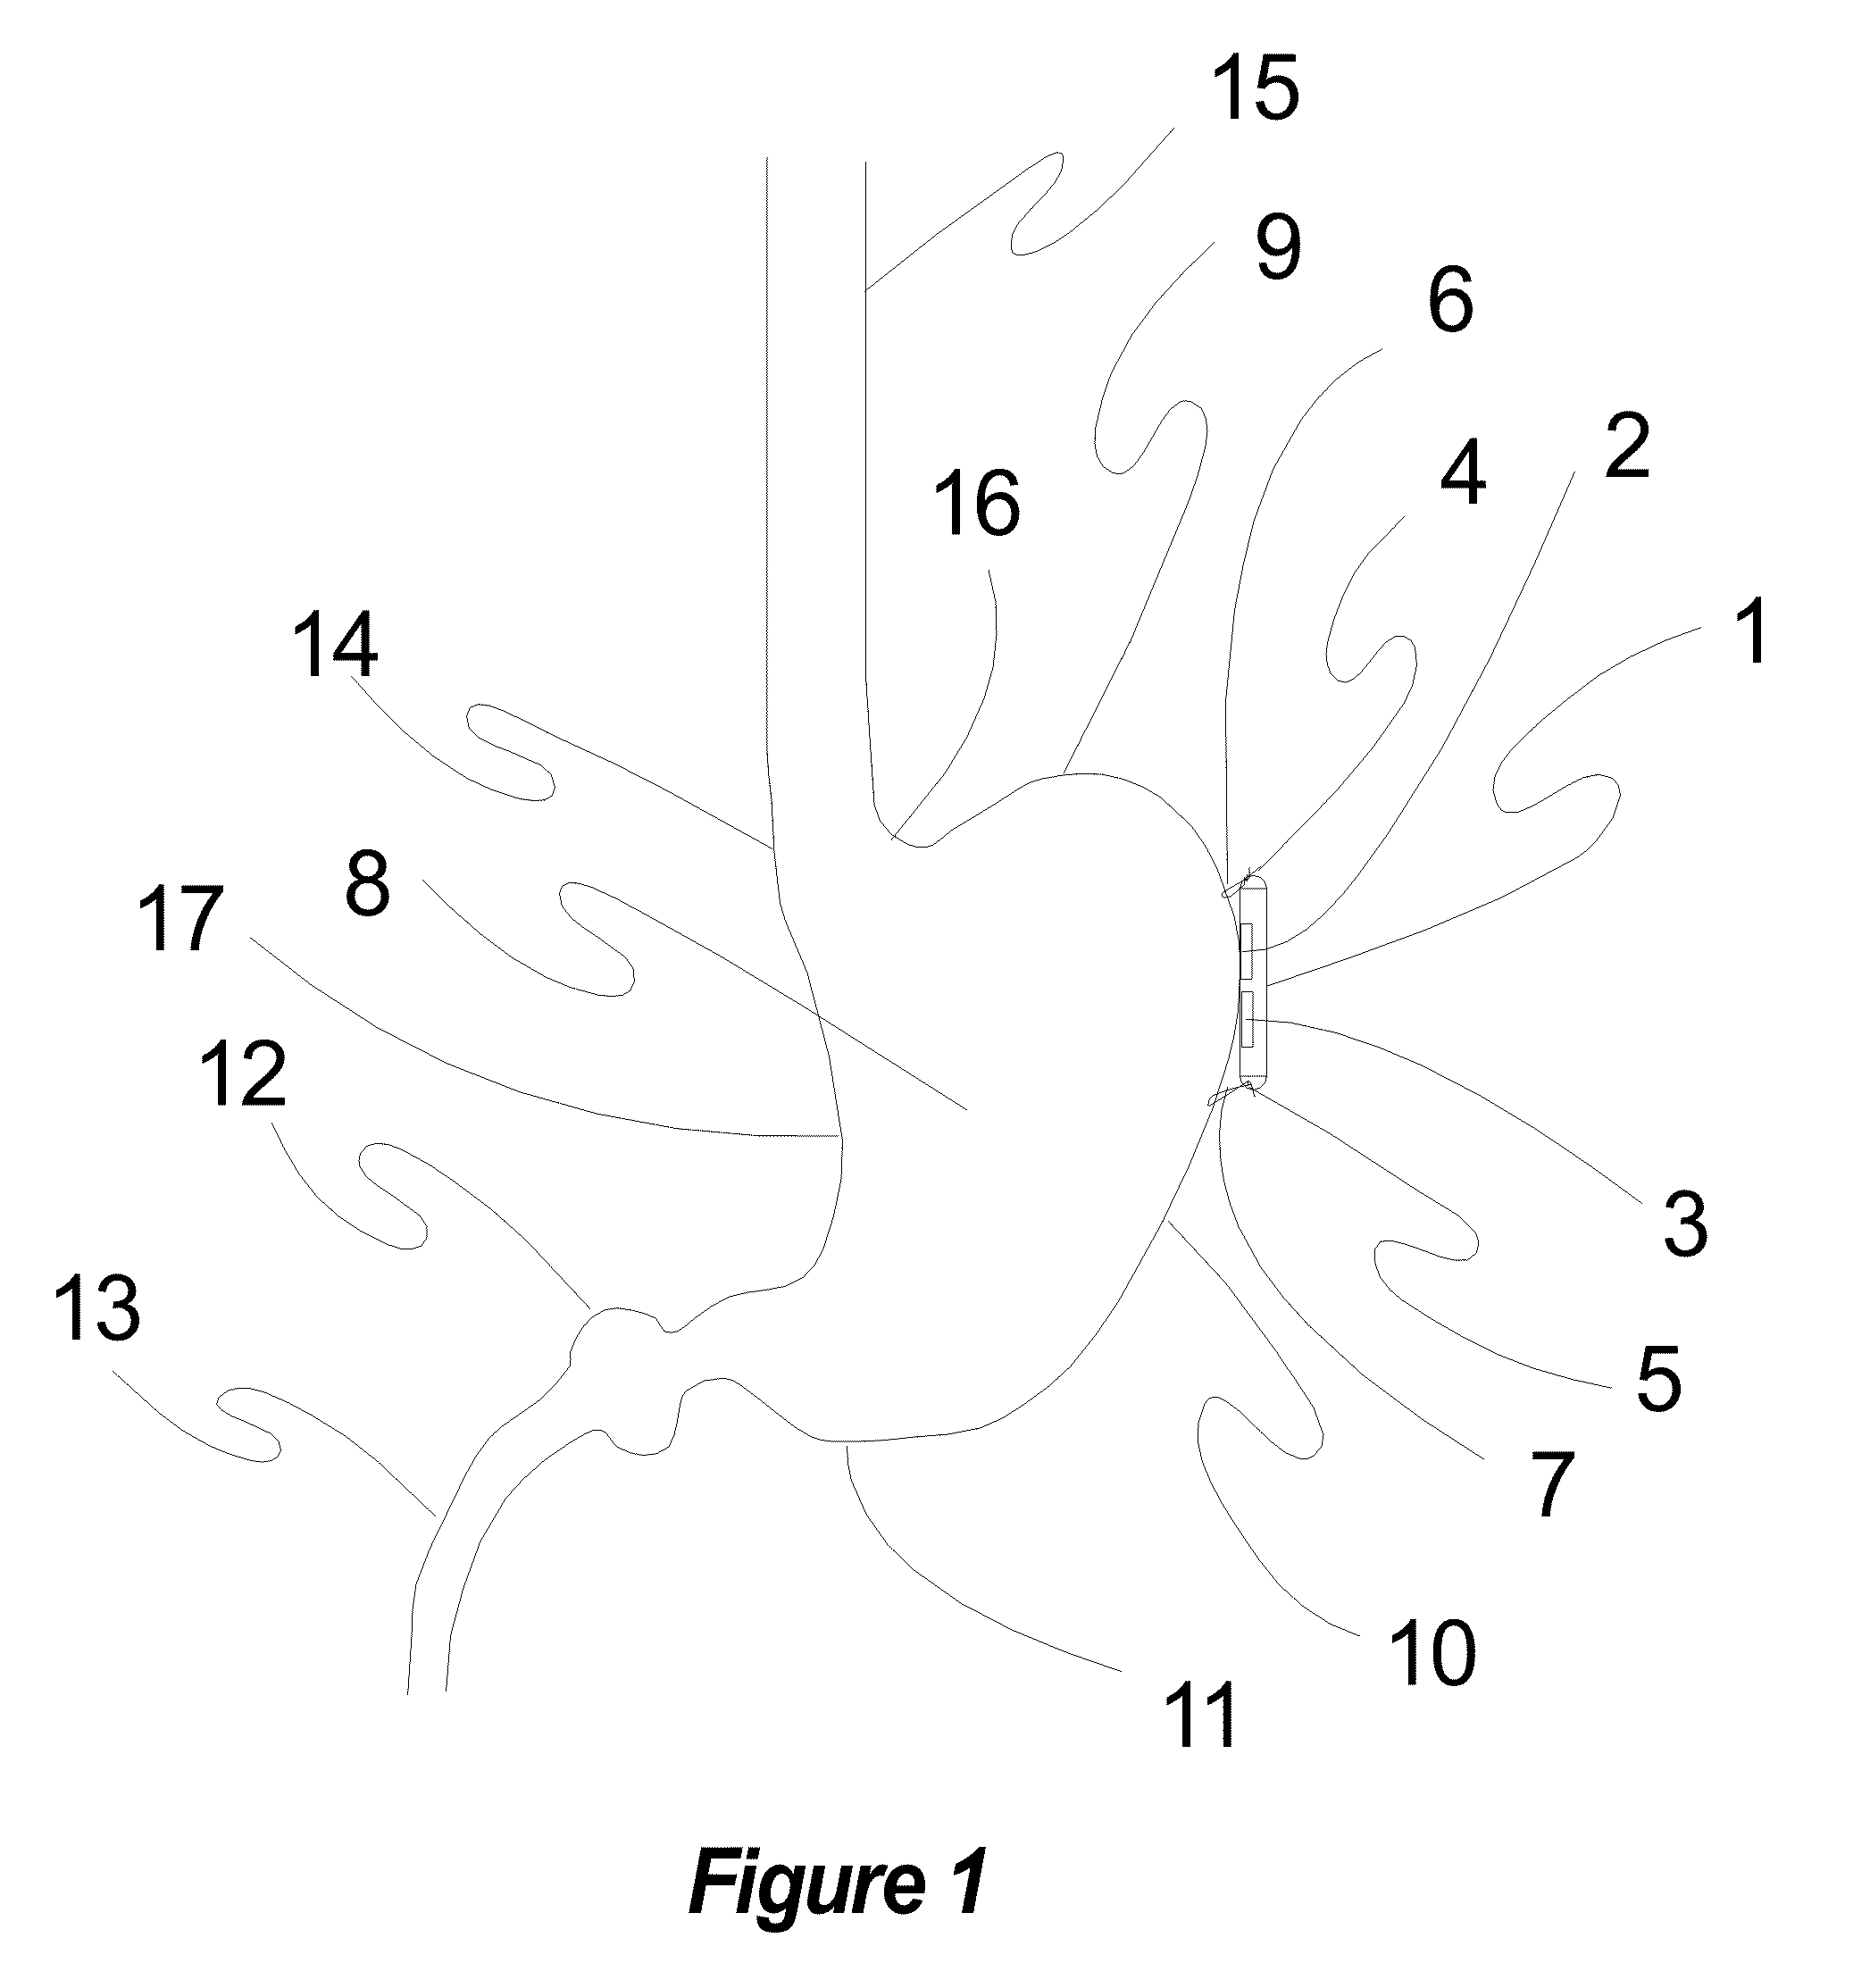 Apparatus for autonomic neuromodulation for the treatment of systemic disease